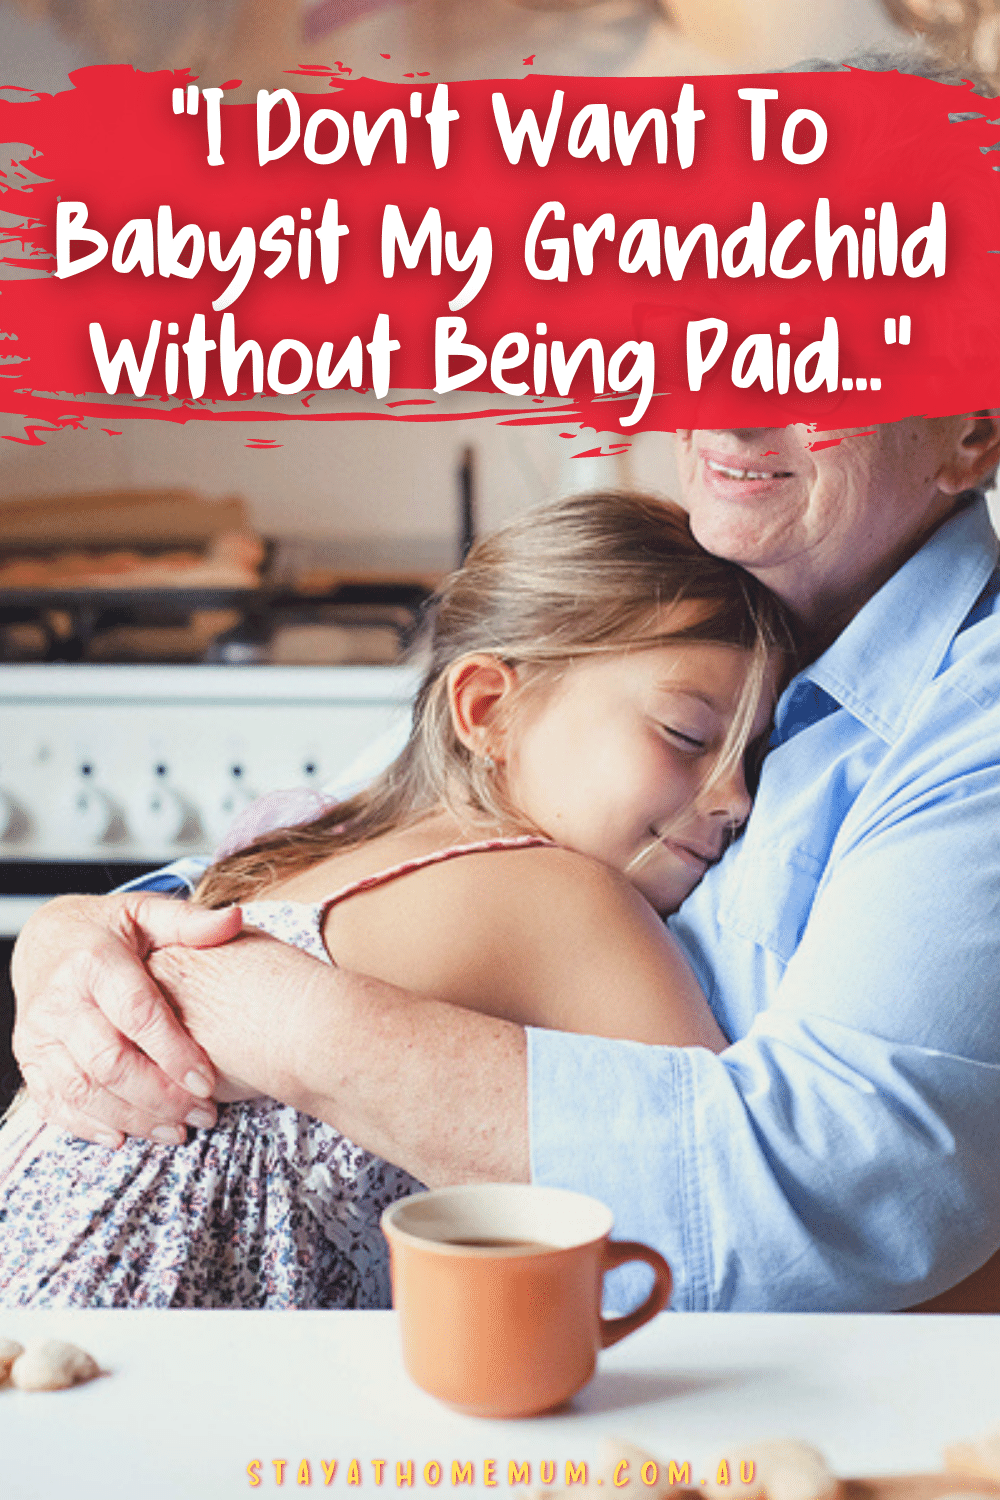 I Don't Want To Babysit My Grandchild Without Being Paid | Stay At Home Mum